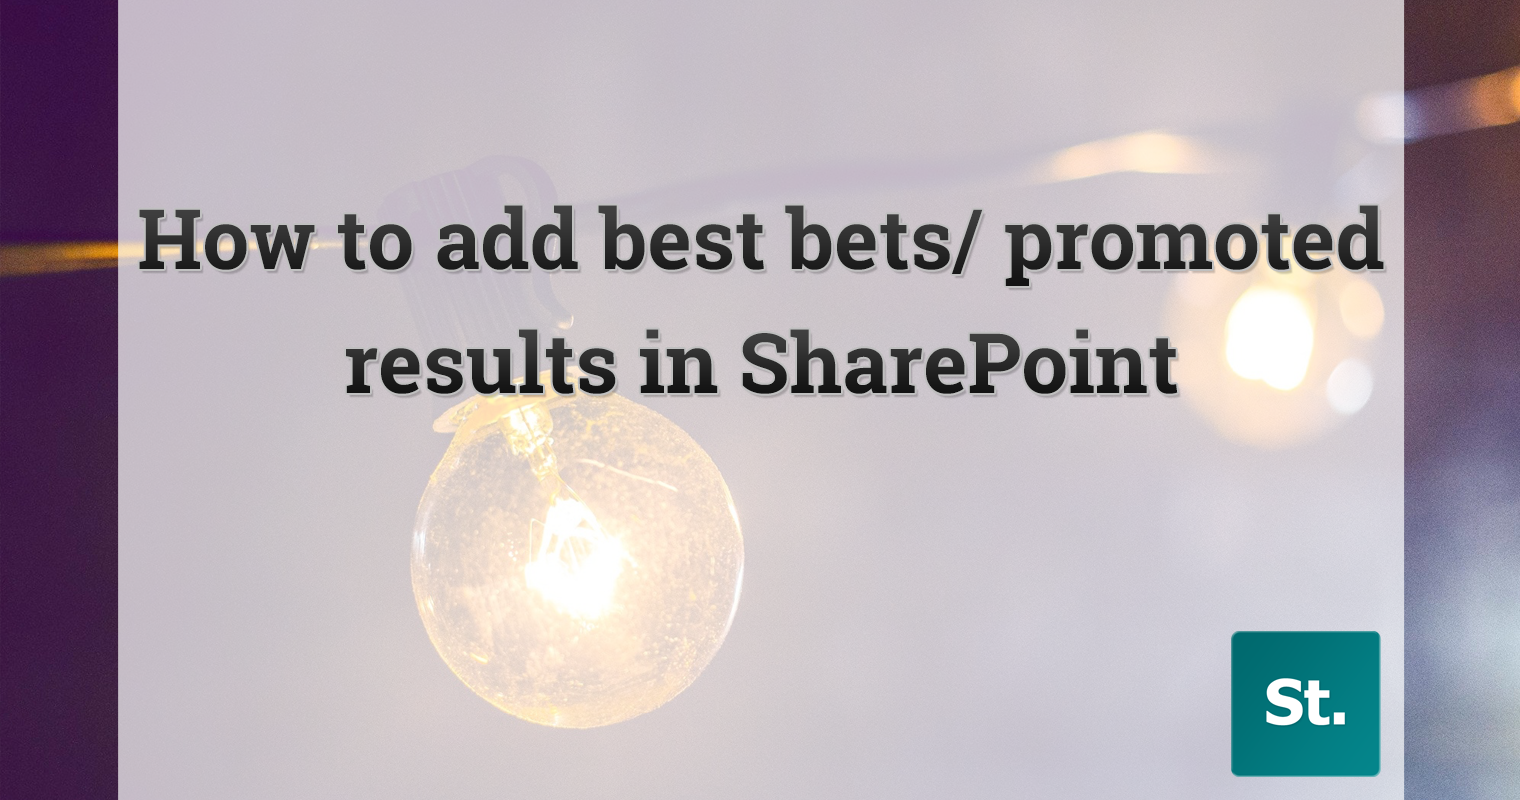 How to add best bets or promoted search results in SharePoint